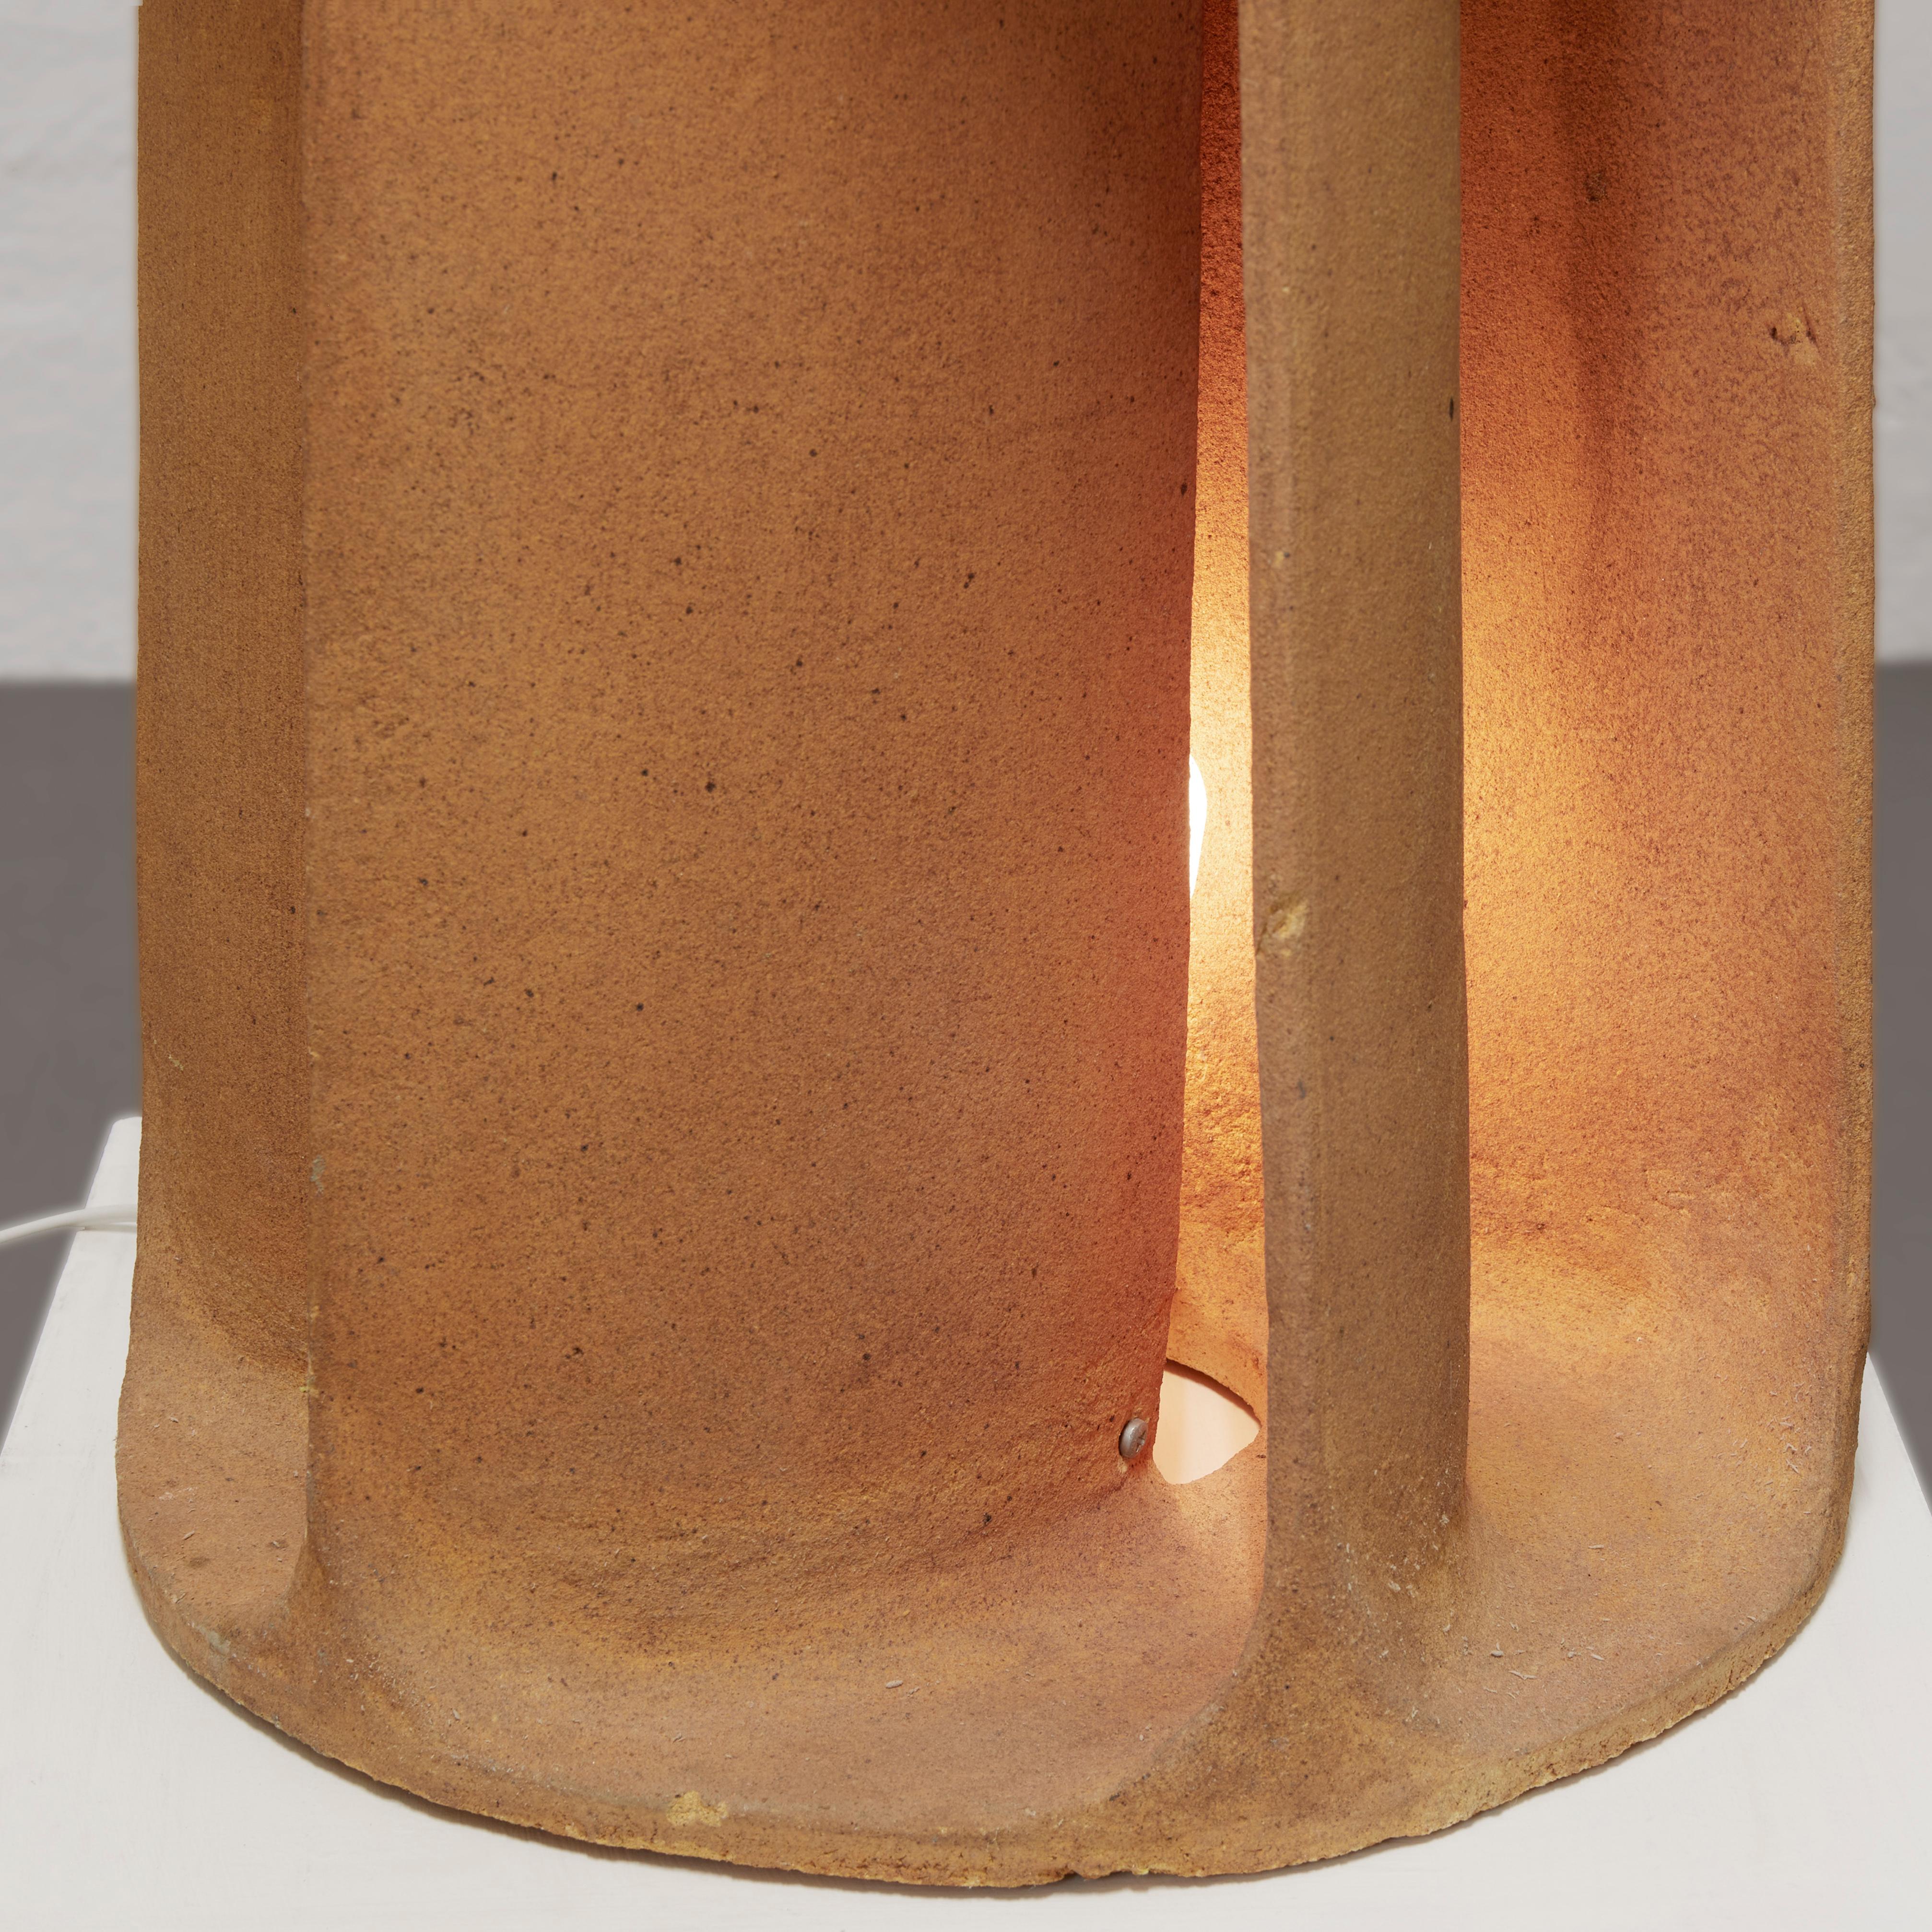 Late 20th Century Illuminated Lighting Sculpture or Table Lamp by Guy Bareff, France c. 1970 For Sale